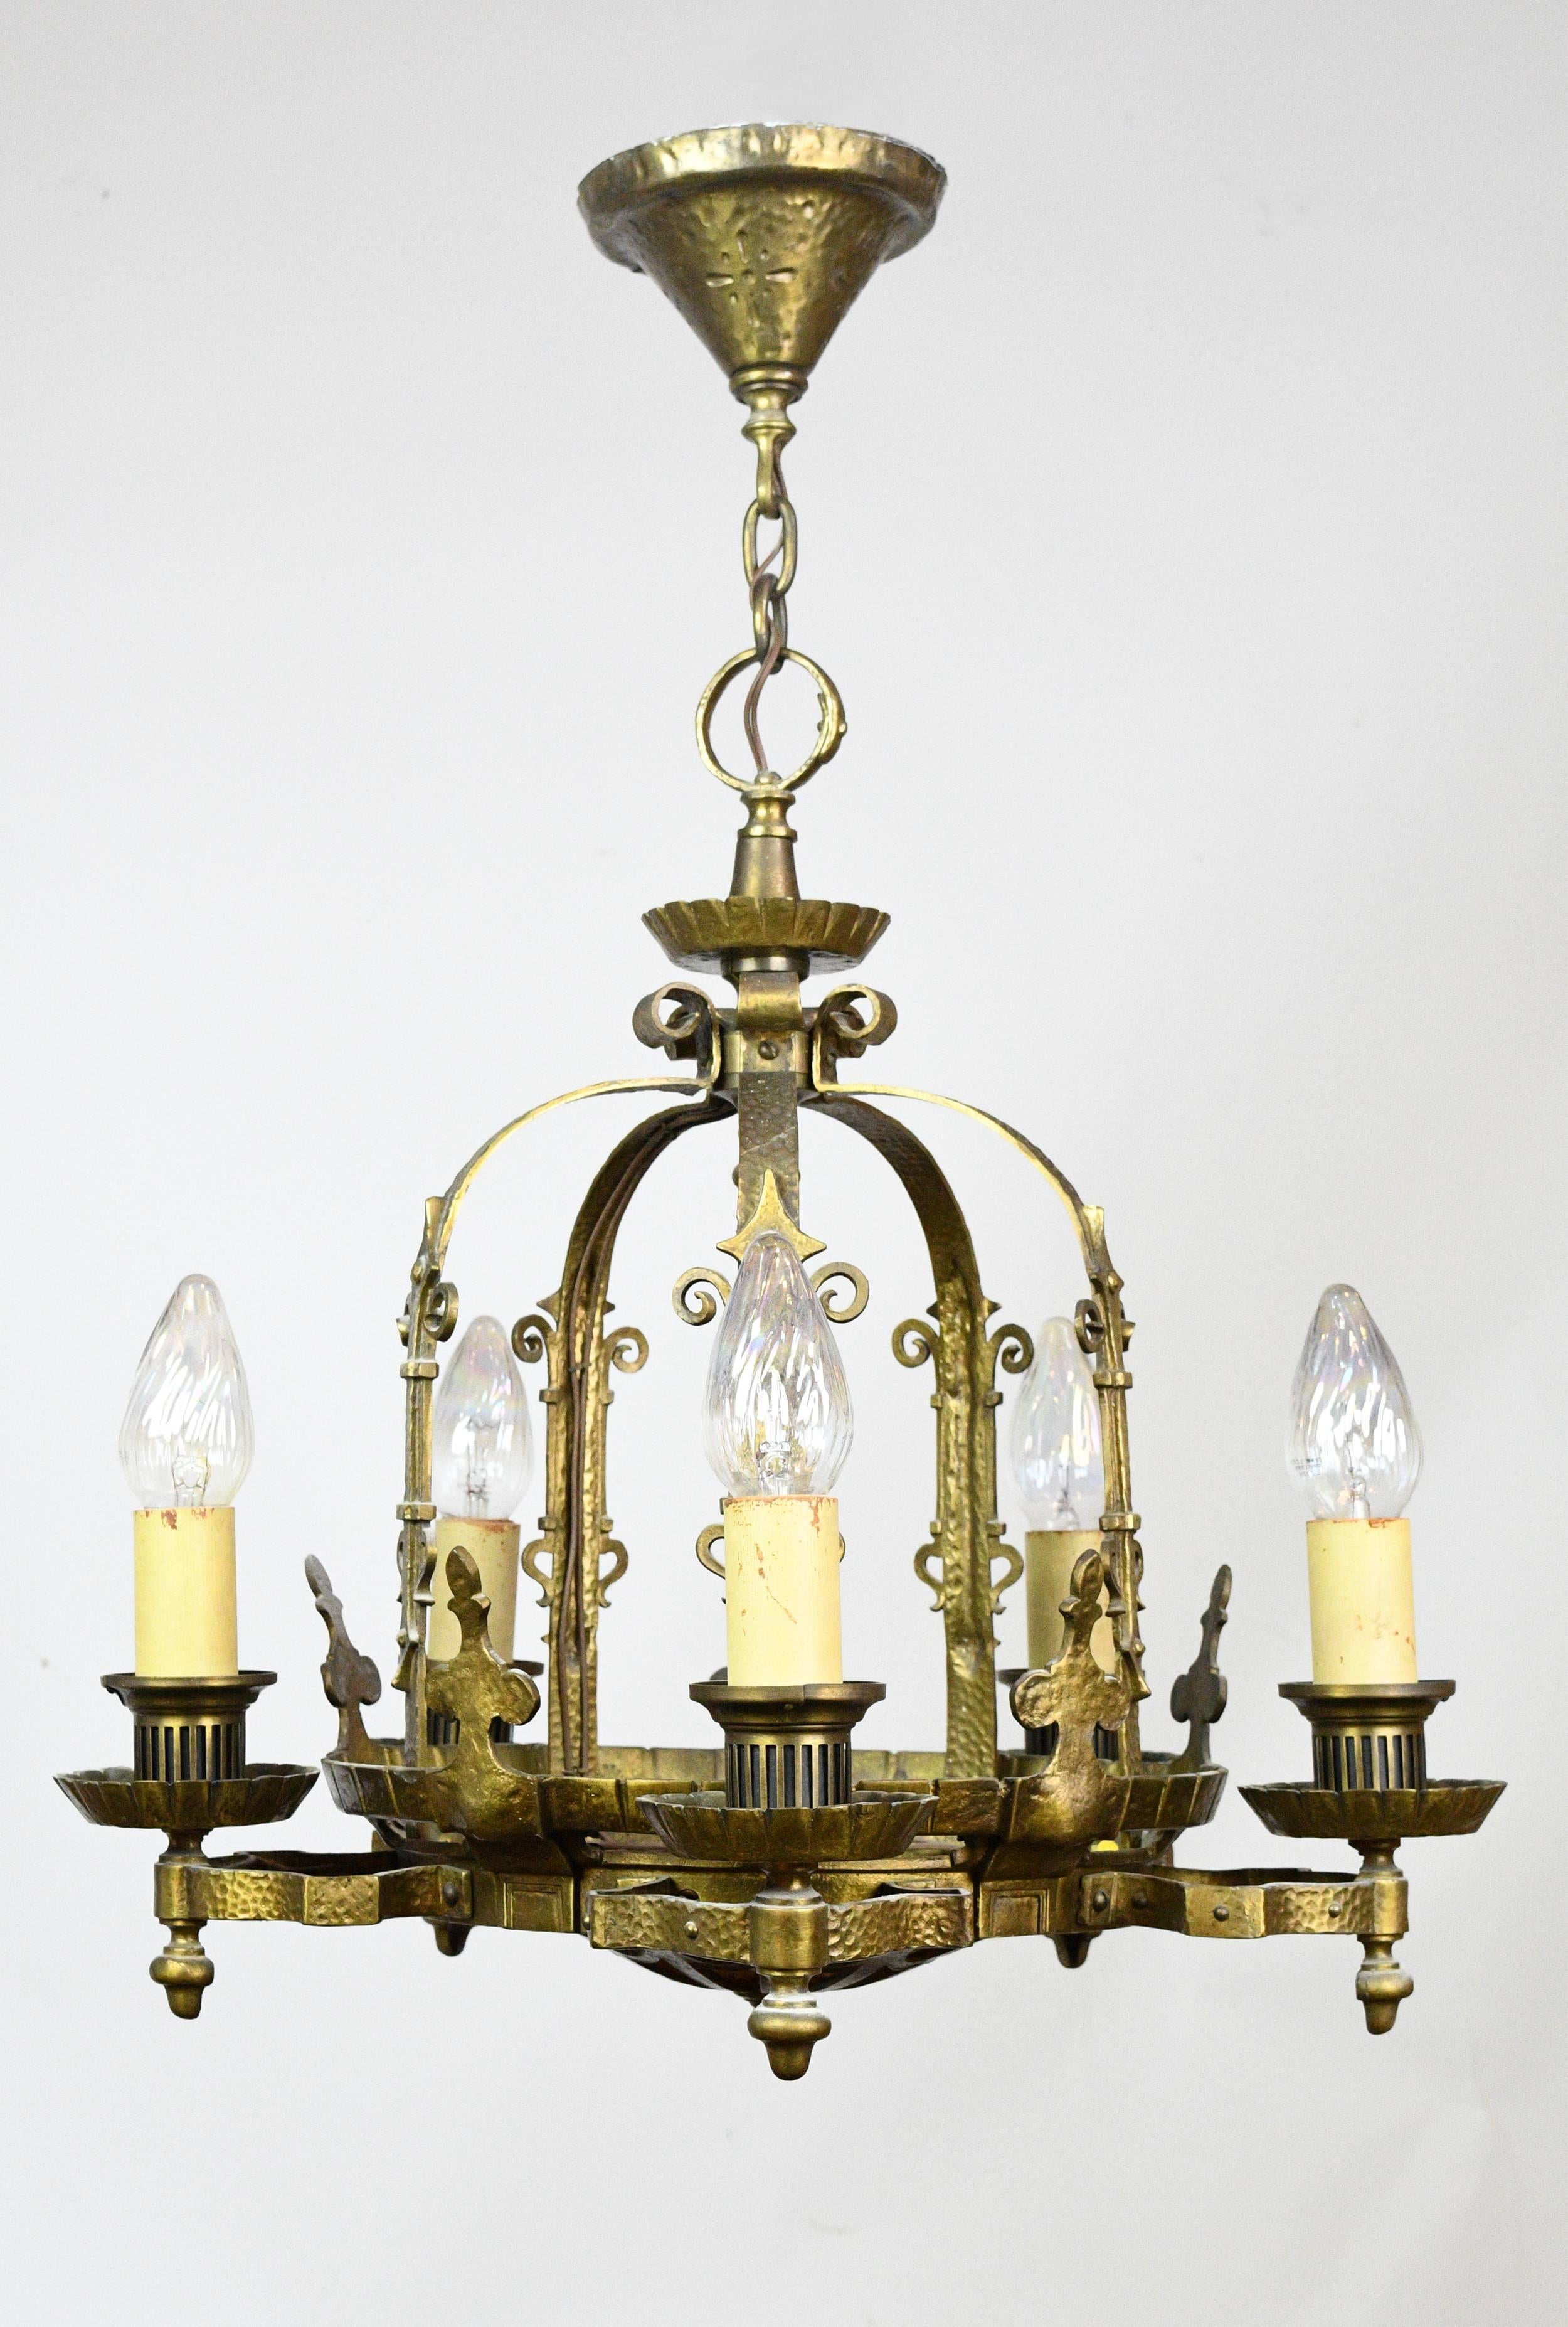 This is a beautiful five-light chandelier influenced by the Gothic Revival movement and design style. What makes this stunning chandelier even more special is it's mica shade/bowl on the bottom. Having the light shining through the mica shade is